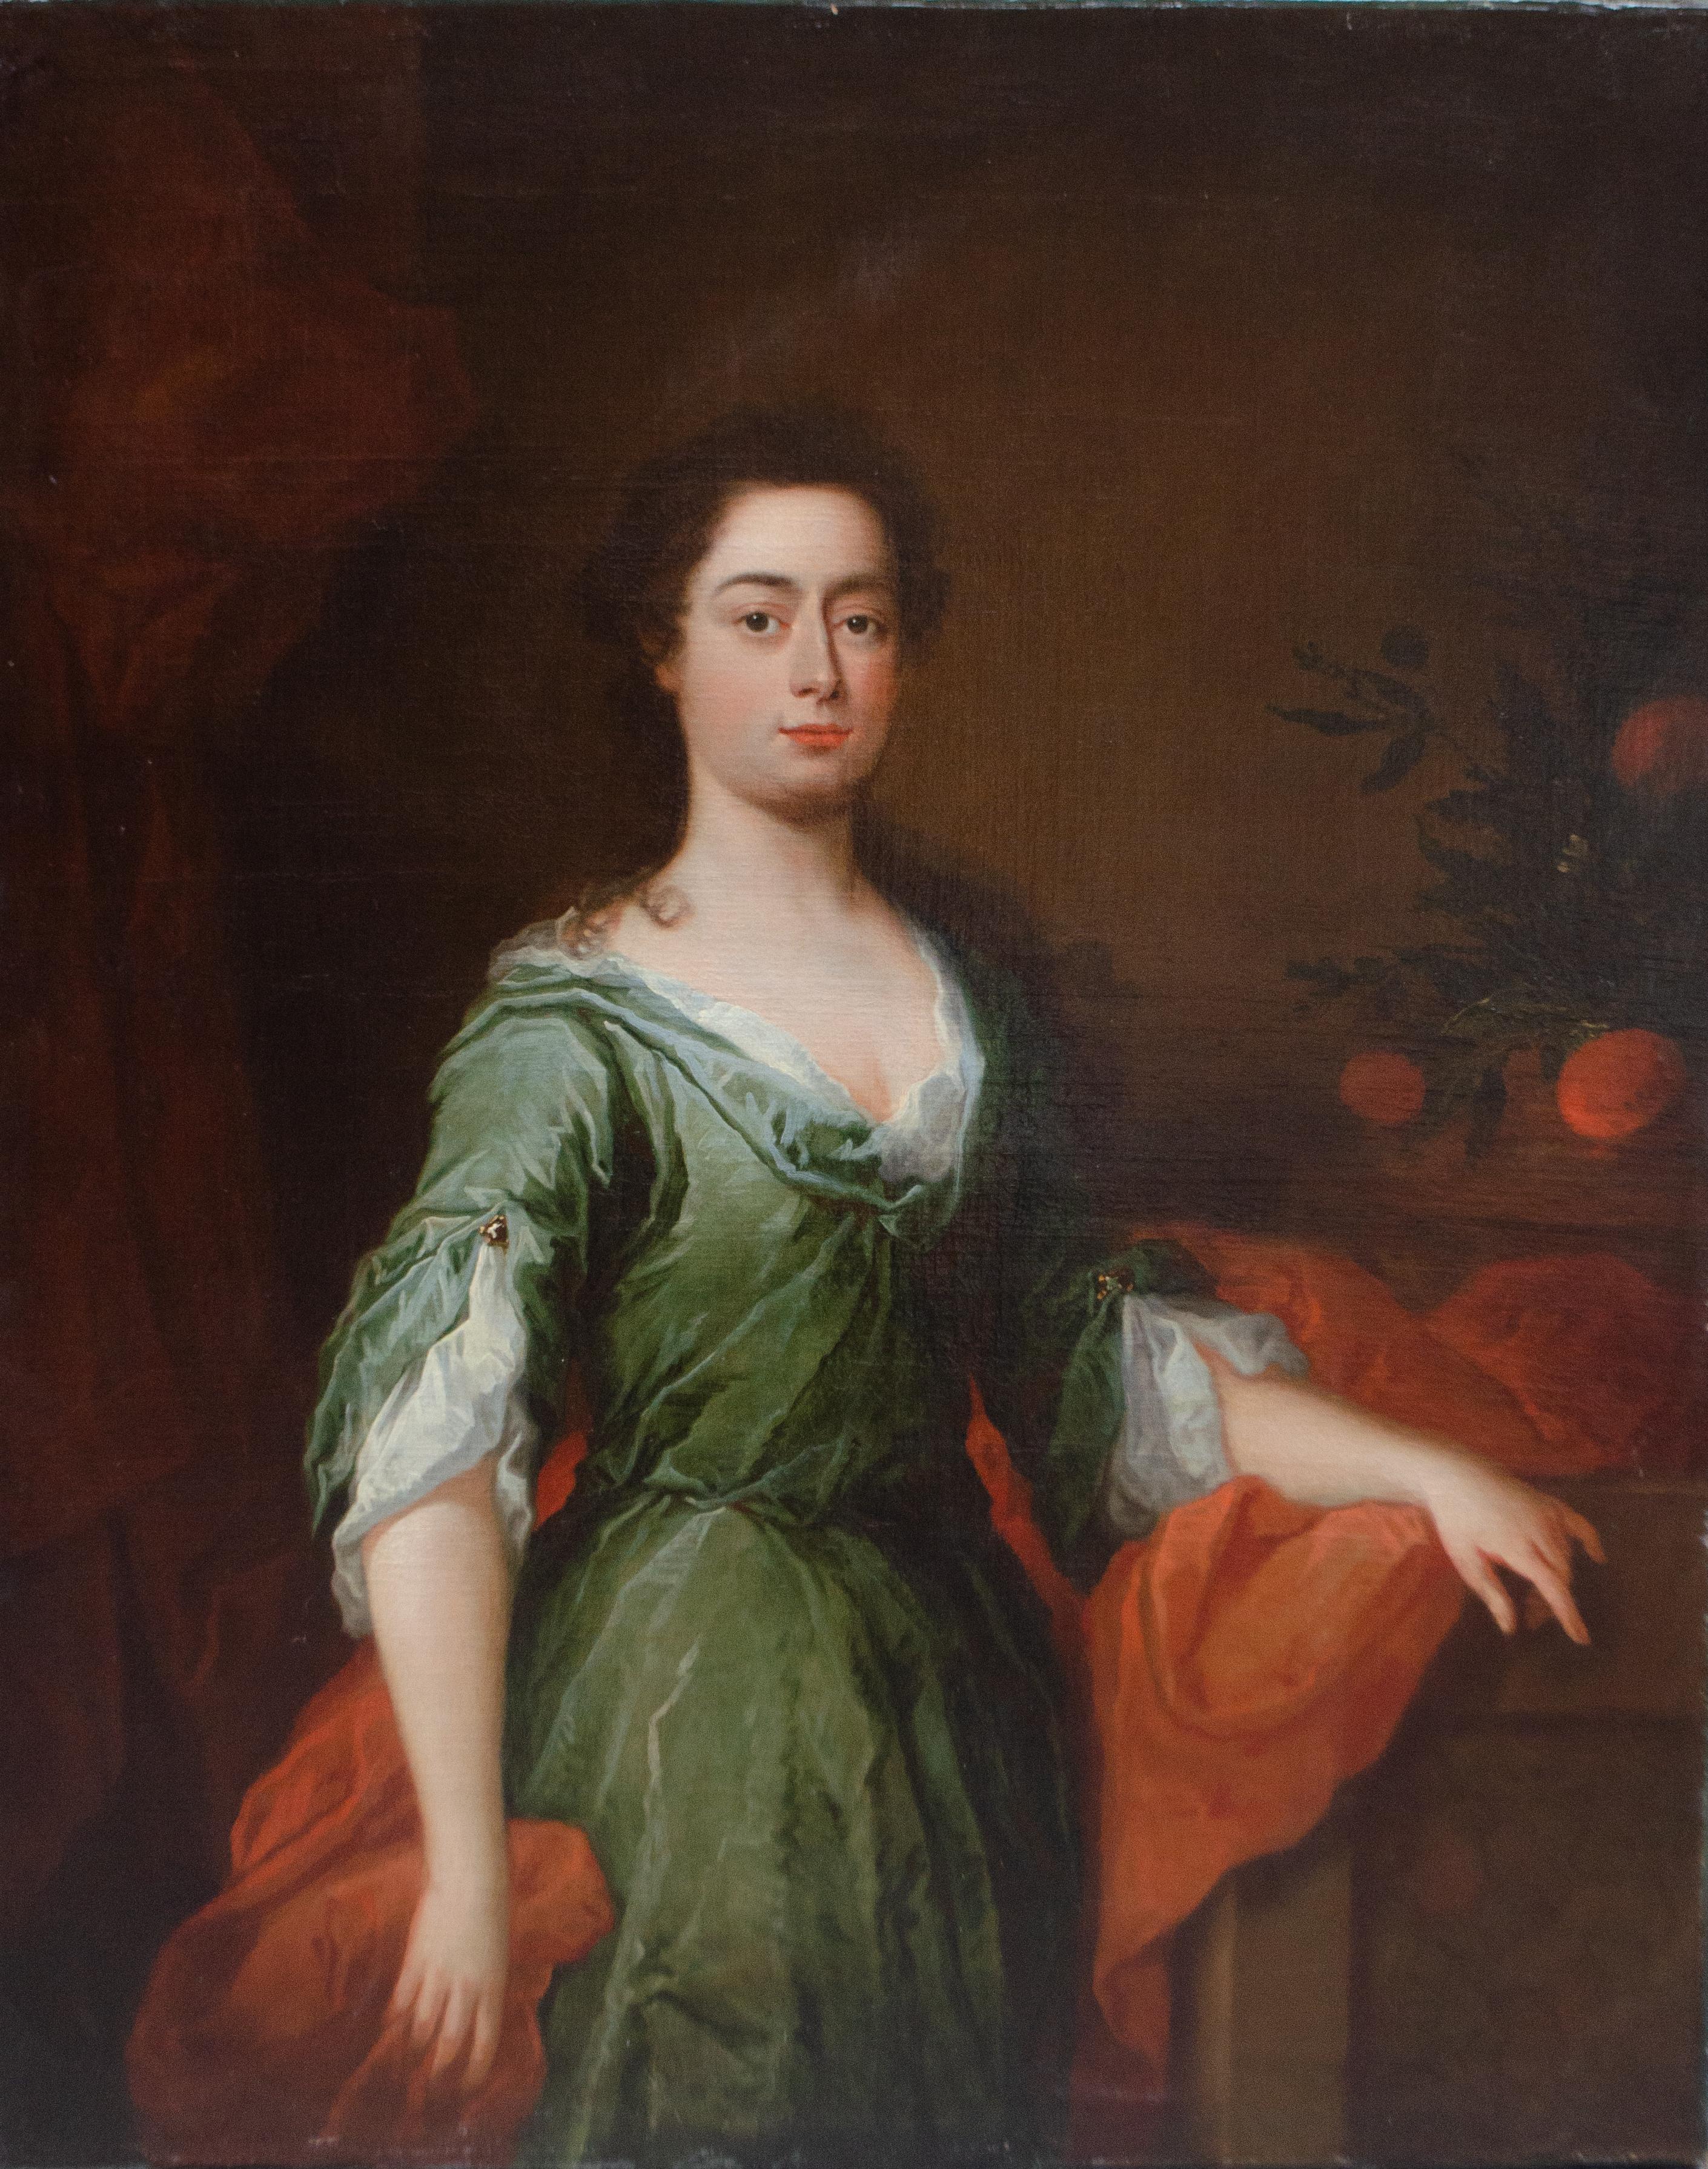 Unknown Portrait Painting - Circa 1715.  Large English School Portrait of Lady with Oranges. 